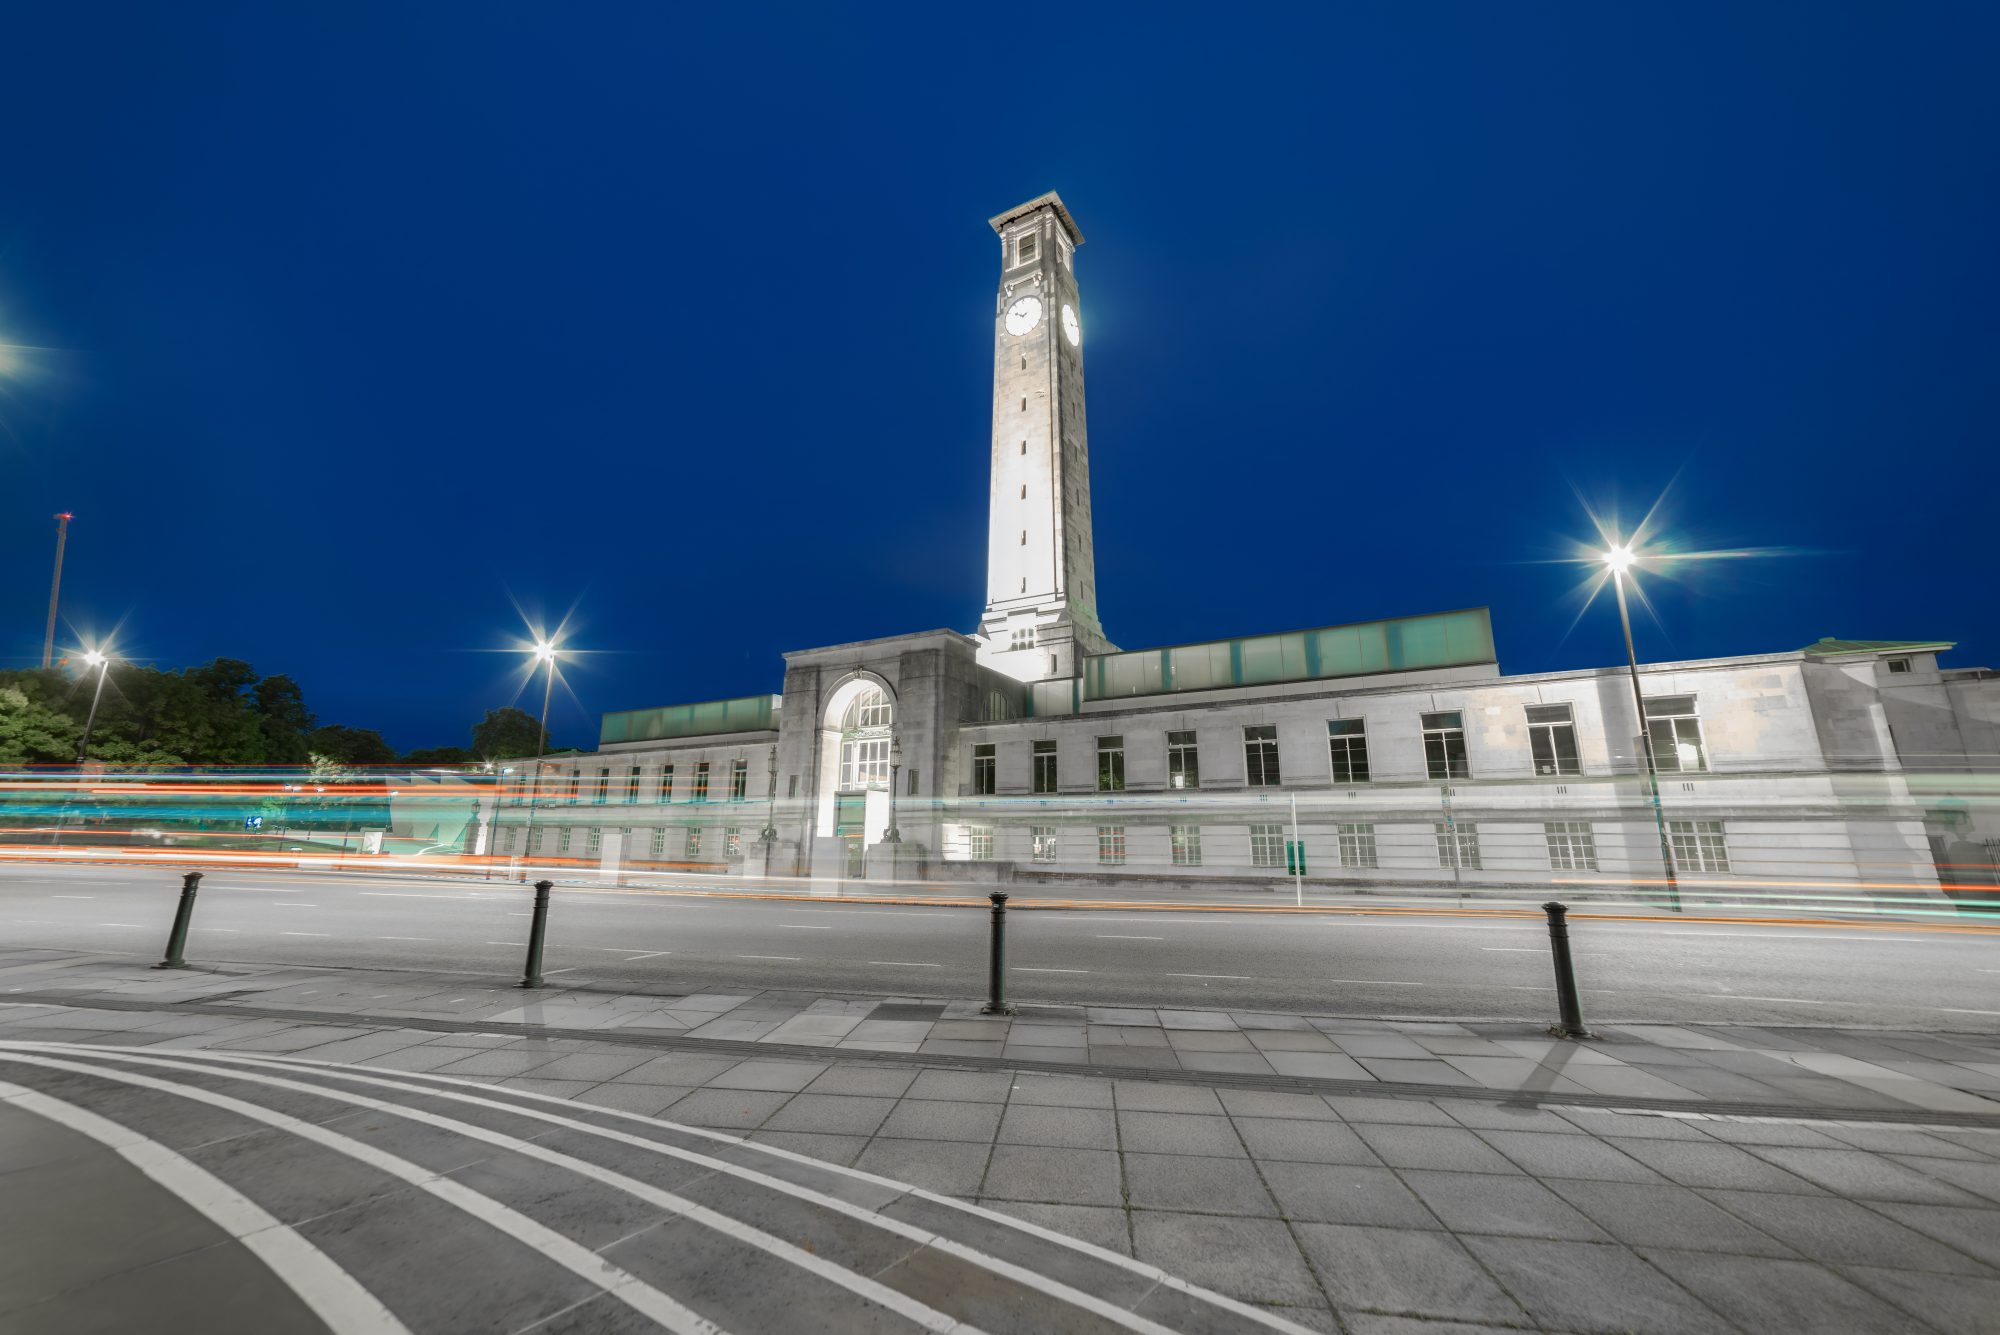 Dusk image of the Civic Centre in Southampton with its tall clock tower; long exposure so that lights are streaking across the image